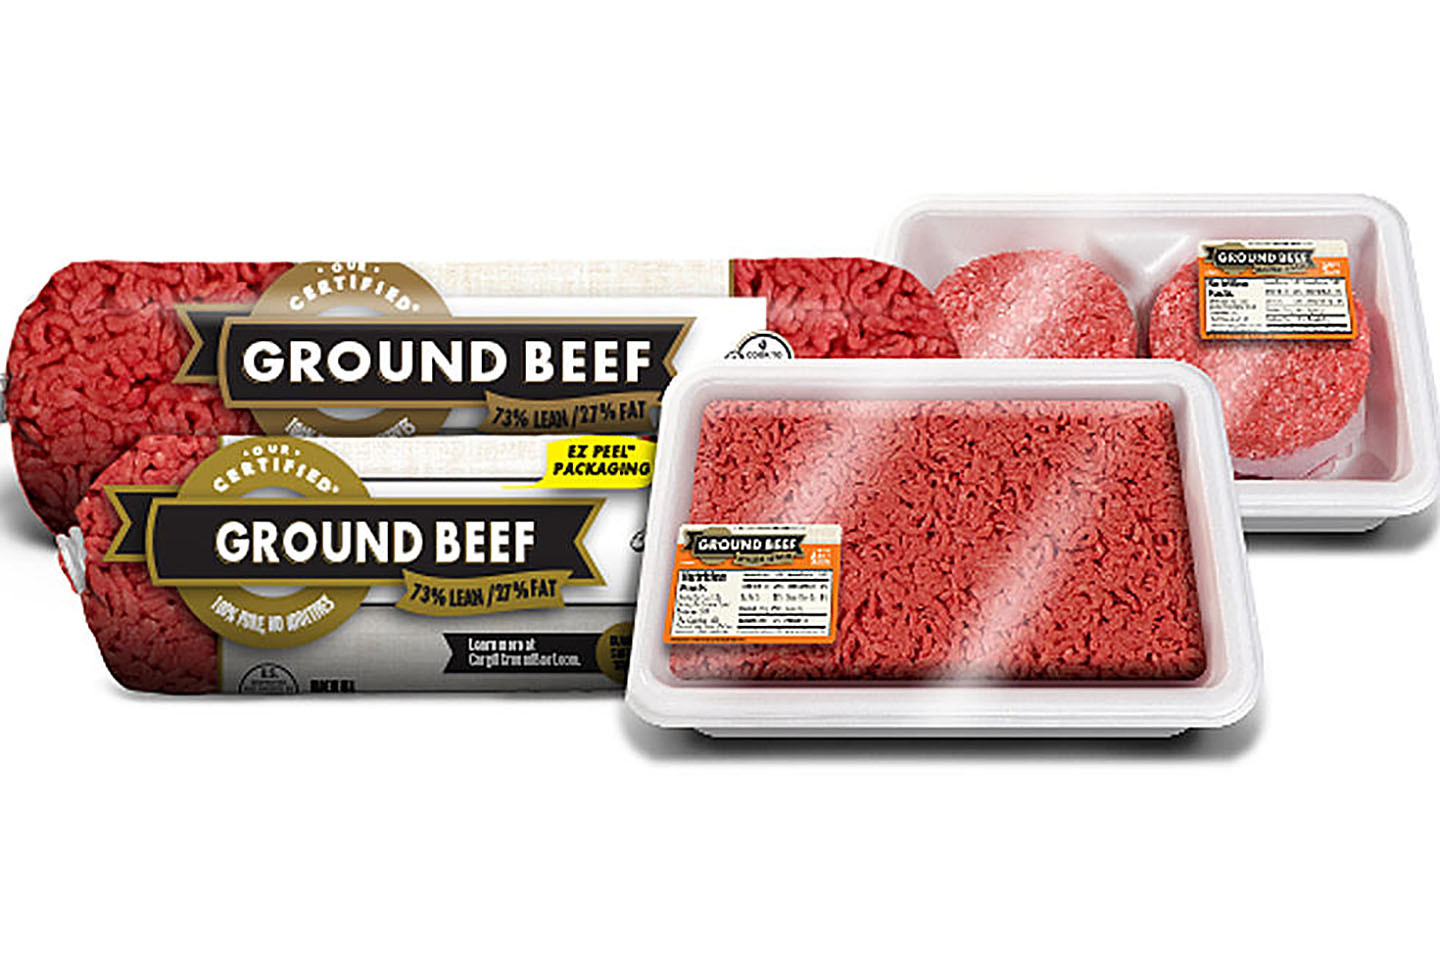 Cargill Ground Beef Luxury Cargill Ground Beef Recalled — Check Your Freezers